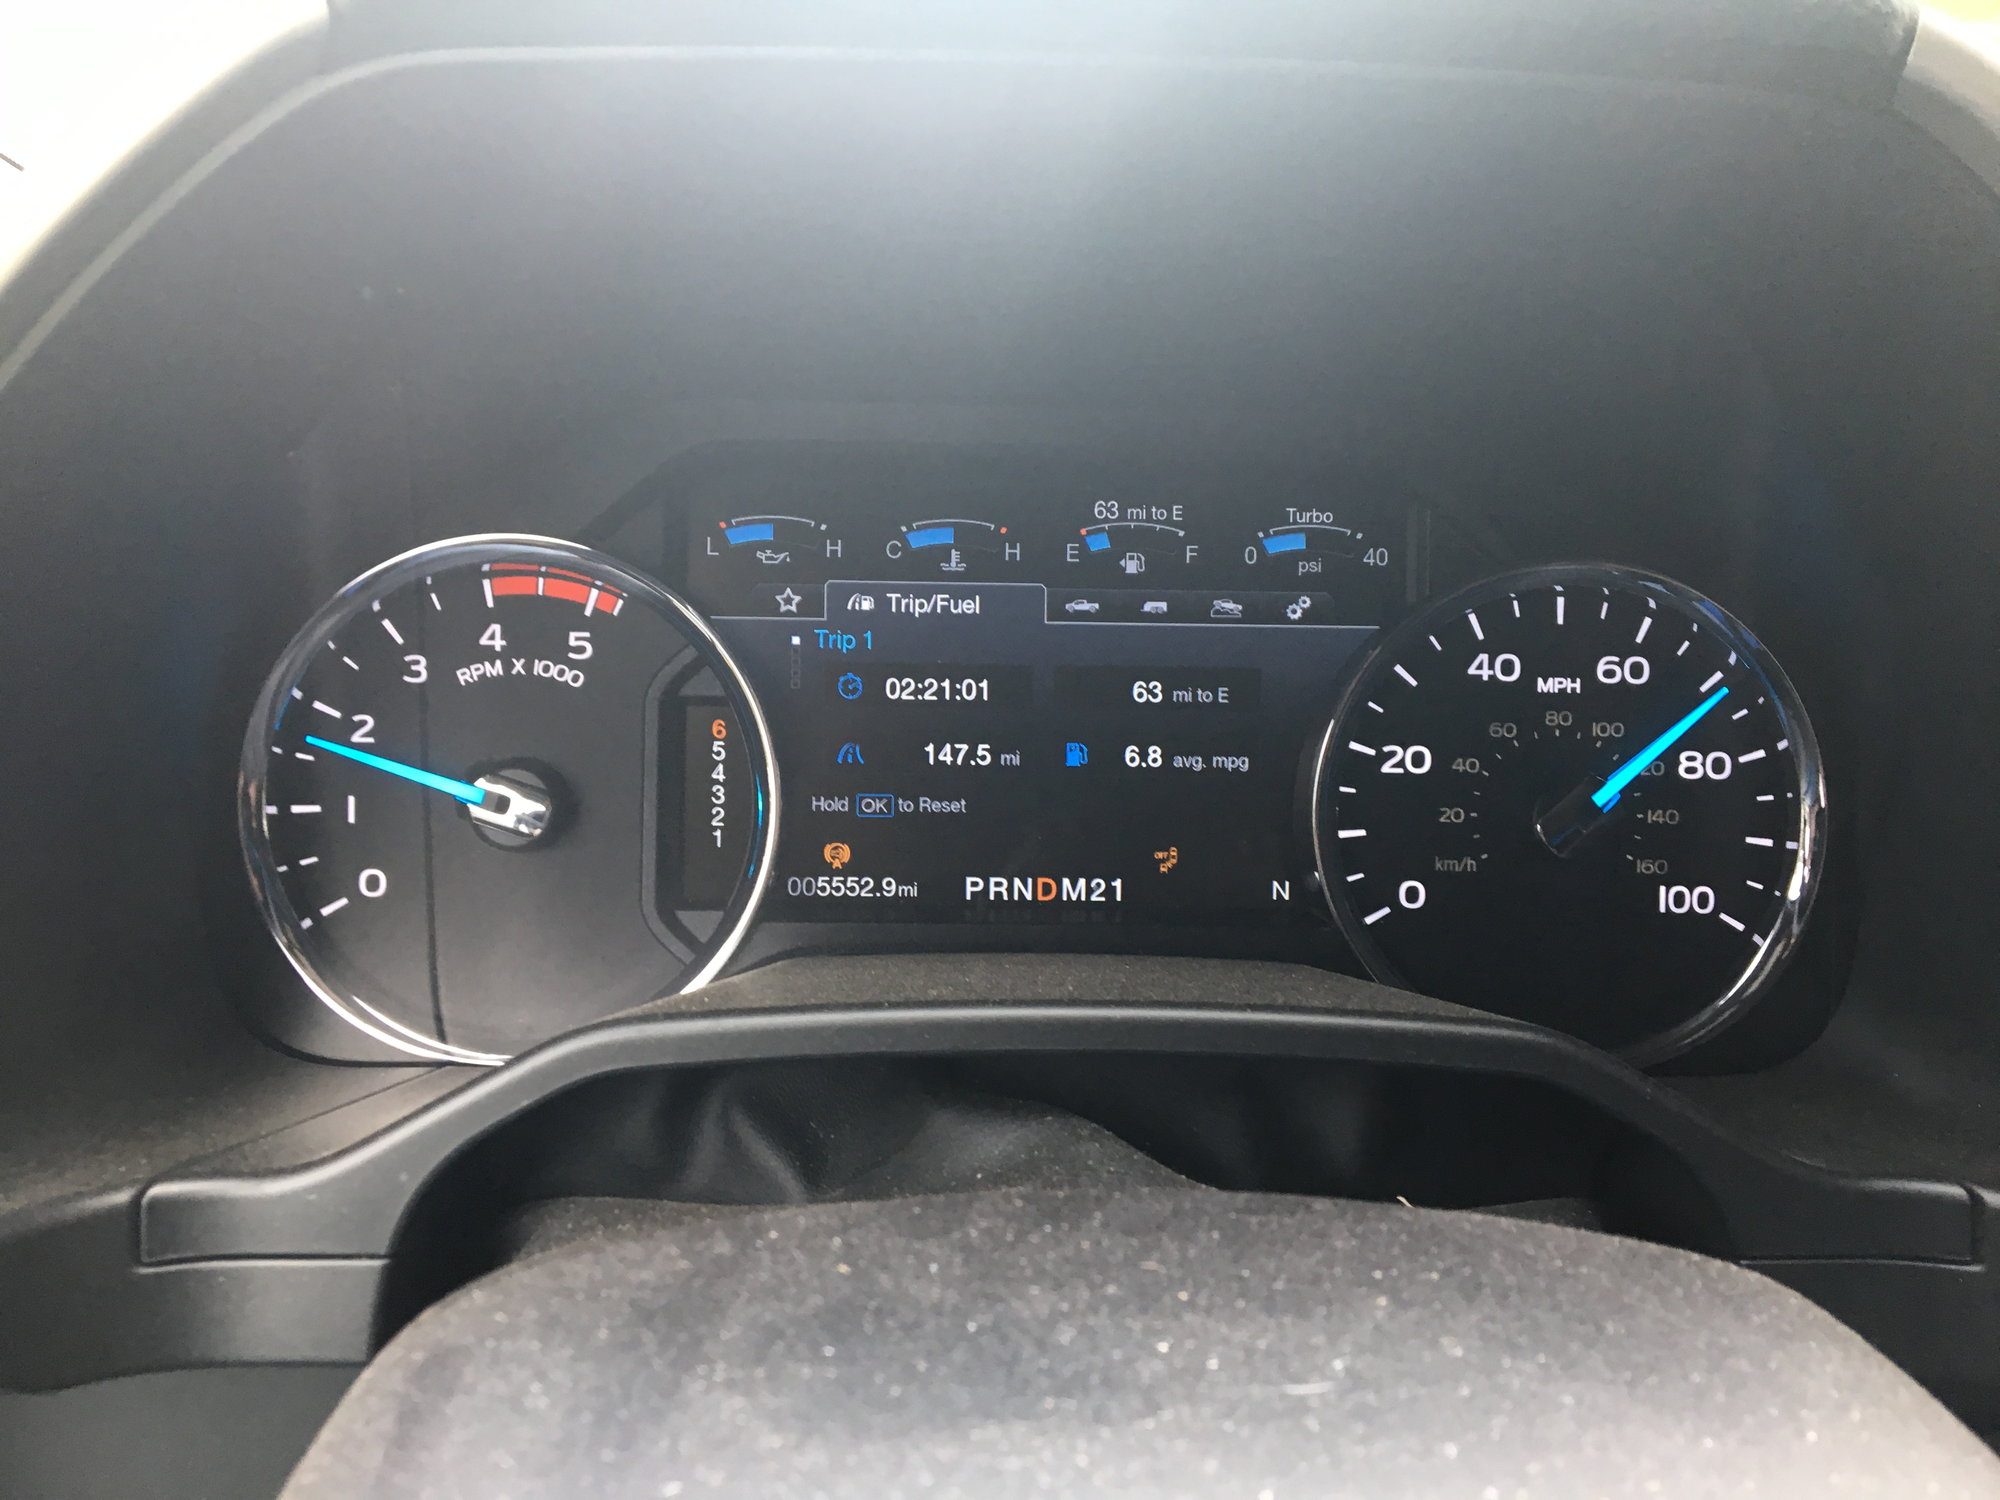 What's your RPM at 70 MPH.... - Ford Truck Enthusiasts Forums Is 4000 Rpm At 70 Mph Bad